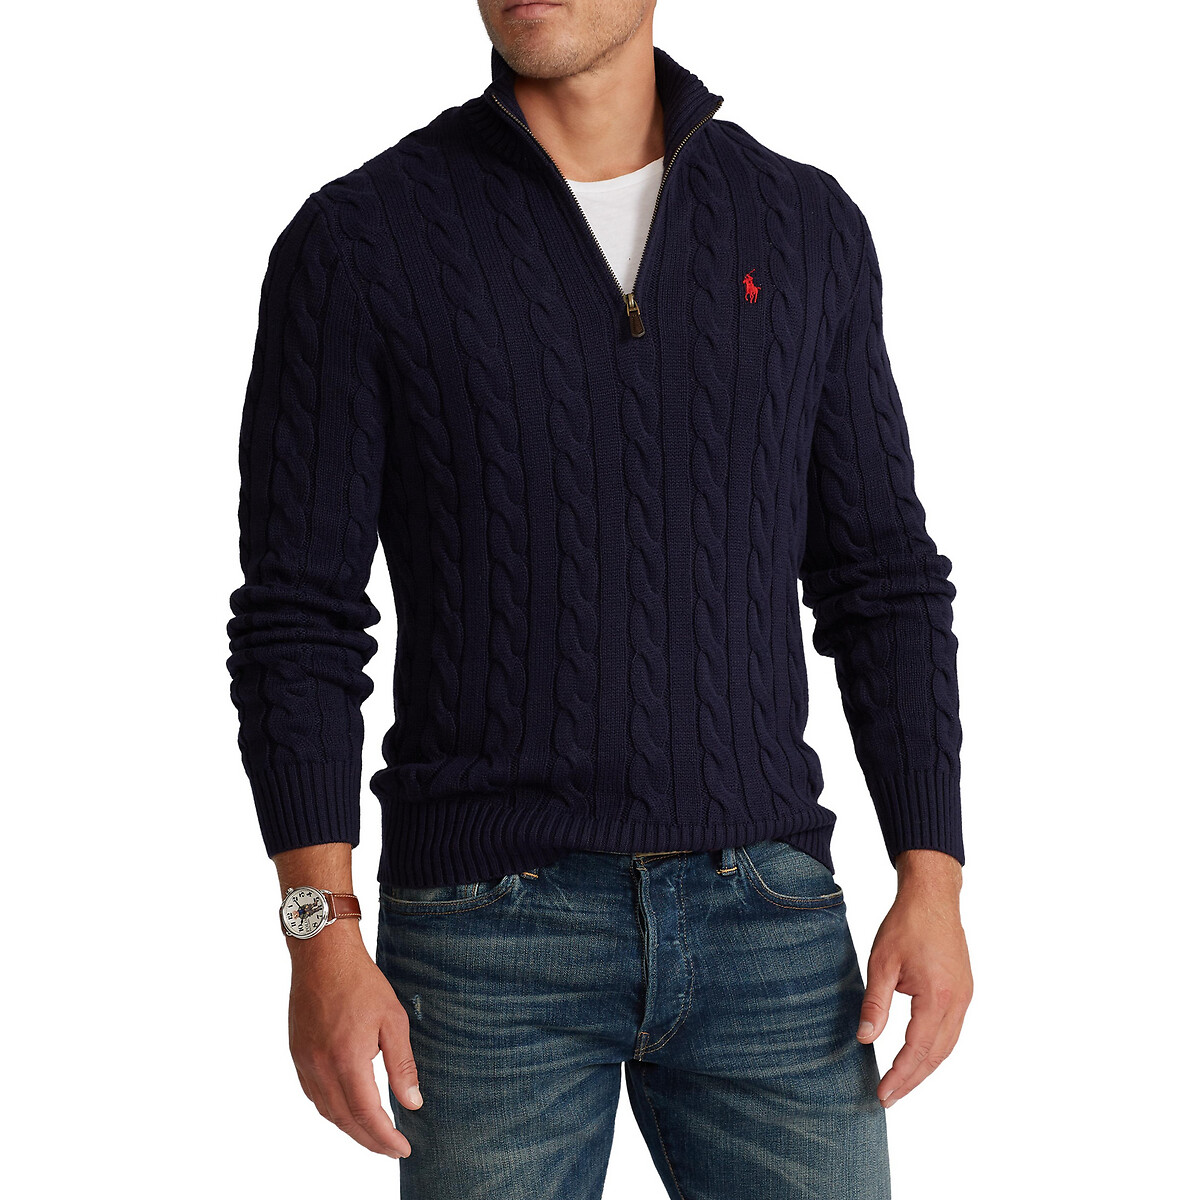 Image of Cotton Half-Zip Jumper in Cable Knit